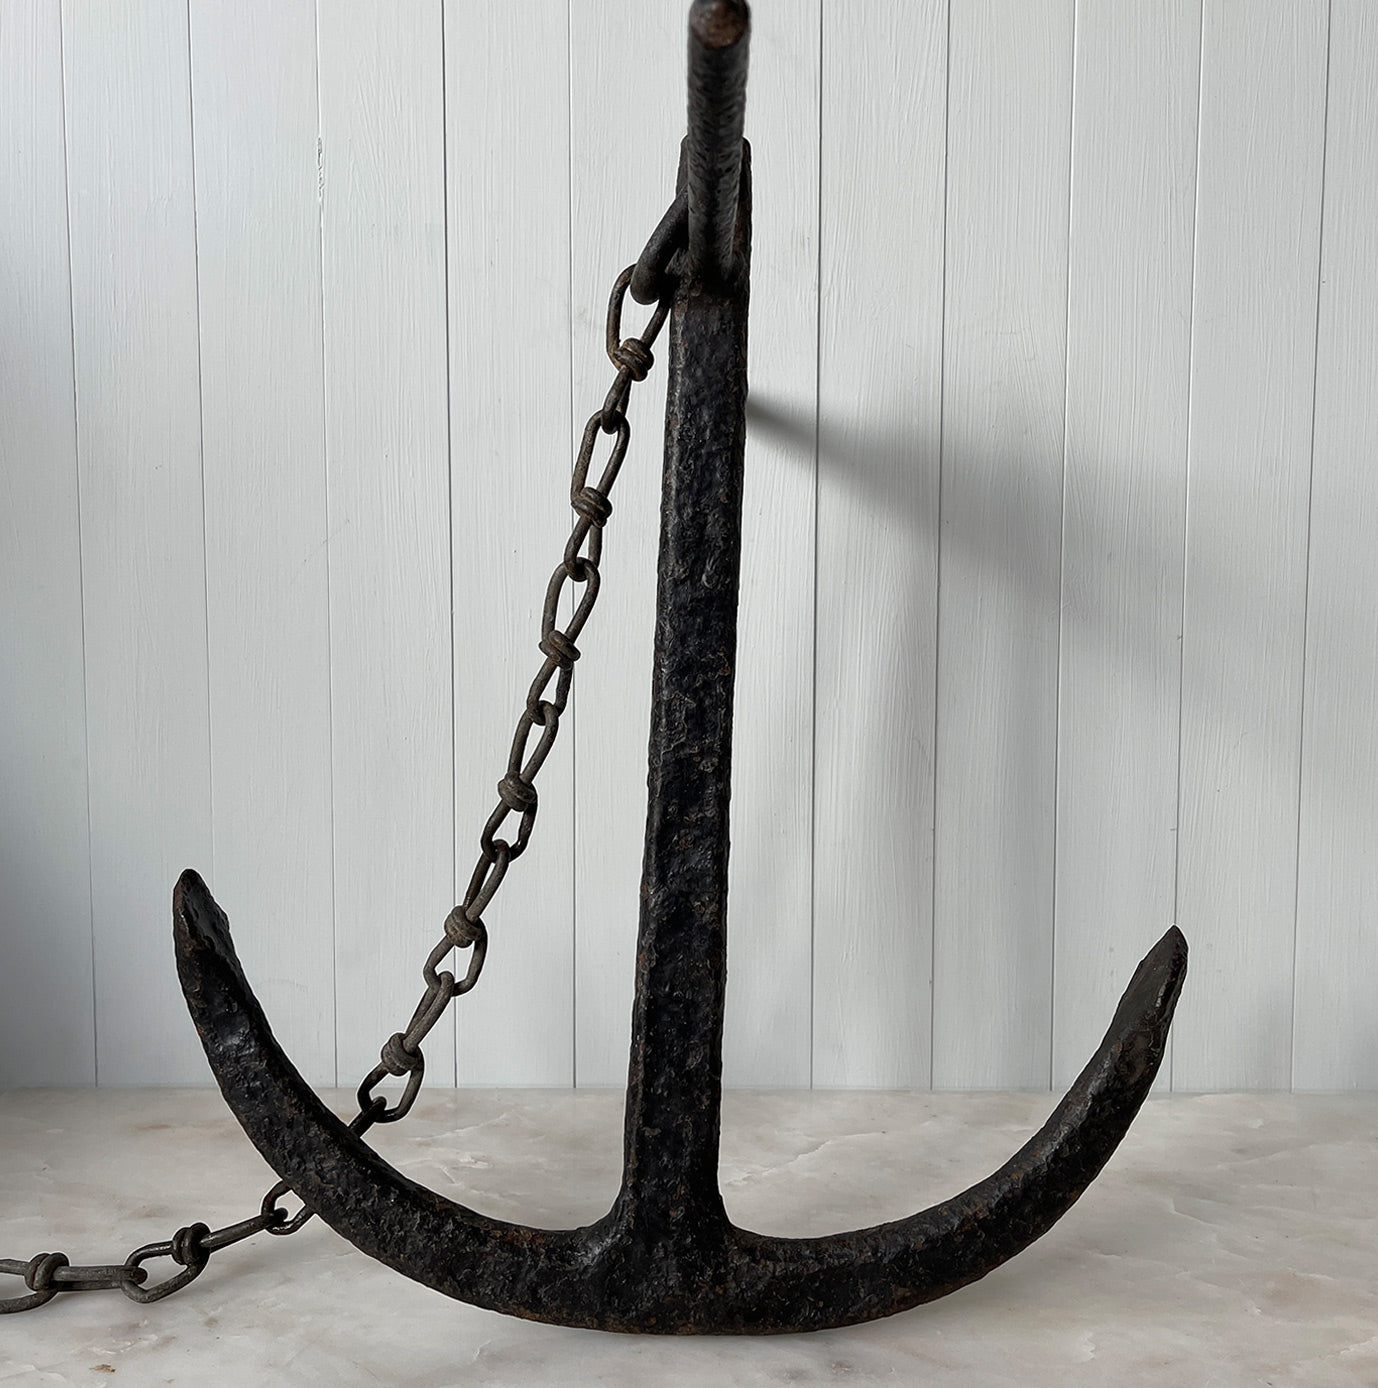 Great looking Vintage Anchor with great wear and Age. Would look great as a doorstop in the house or as a decoration in the garden next to some old pots - SHOP NOW - www.intovintage.co.uk